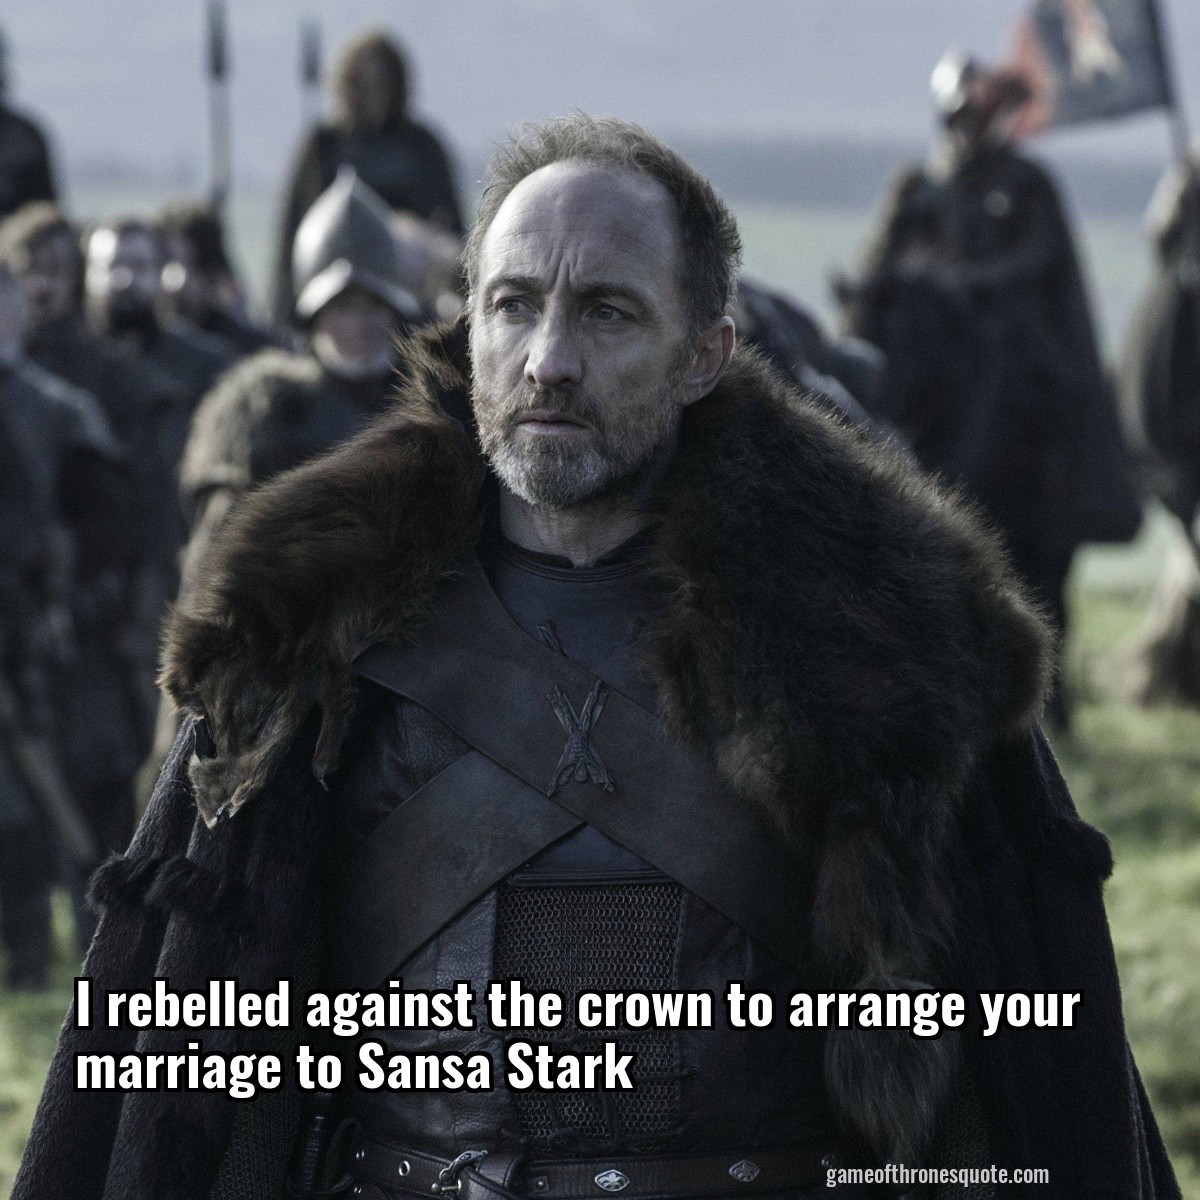 I rebelled against the crown to arrange your marriage to Sansa Stark